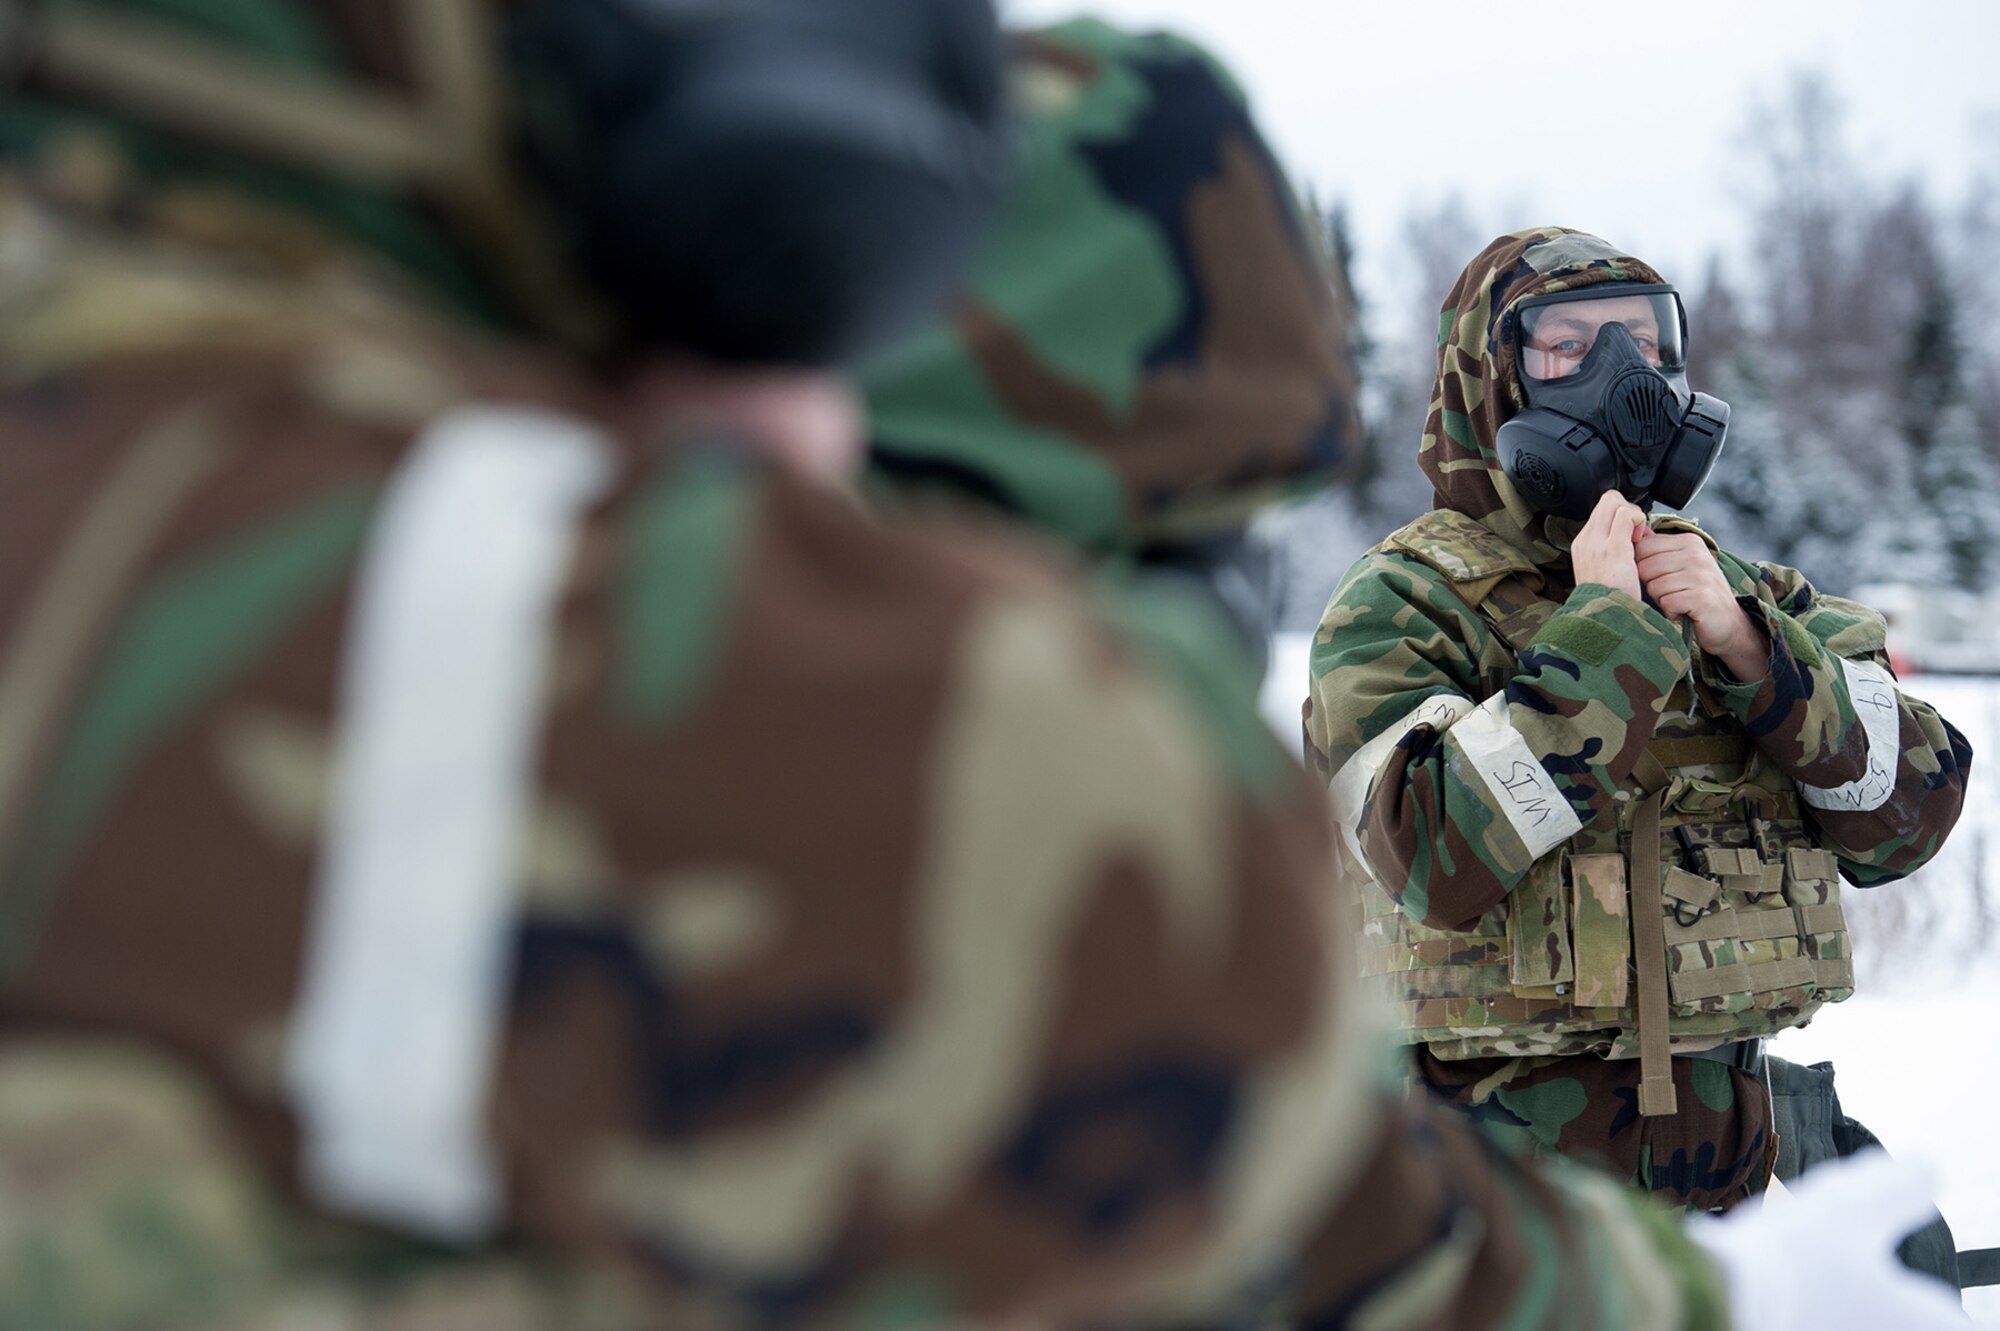 An Airman assigned to the 673d Civil Engineer Squadron, Explosives Ordinance Disposal Flight, adjusts his protective gear before a live-fire demolitions exercise in Mission Oriented Protective Posture 4 on Joint Base Elmendorf-Richardson, Alaska, Feb.14, 2018.  The Airmen were conducting EOD training in a simulated chemical weapons contaminated environment.